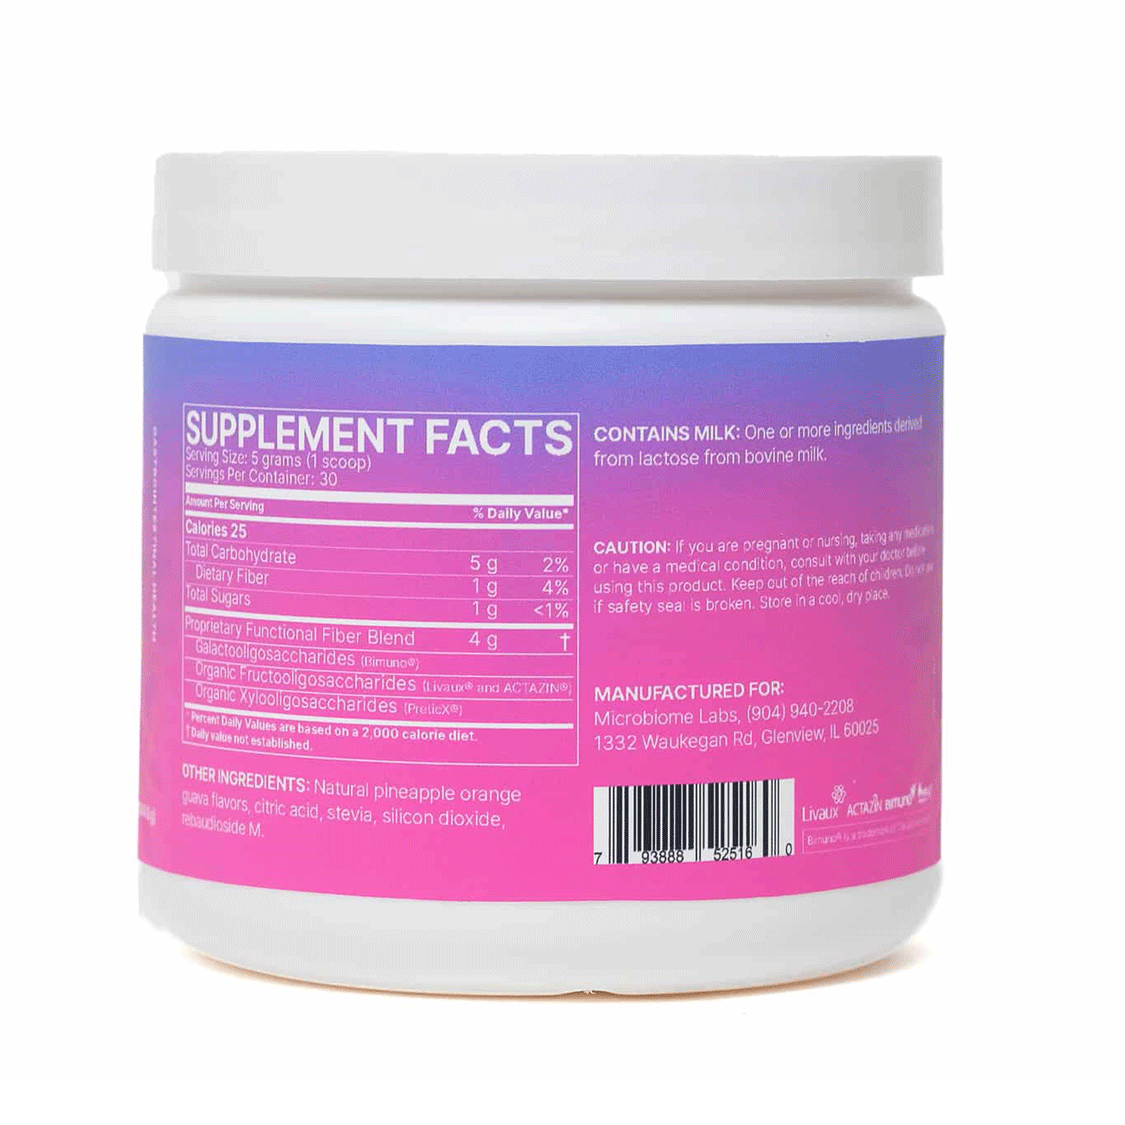 MegaPre Powder by Microbiome Labs Supplement Facts